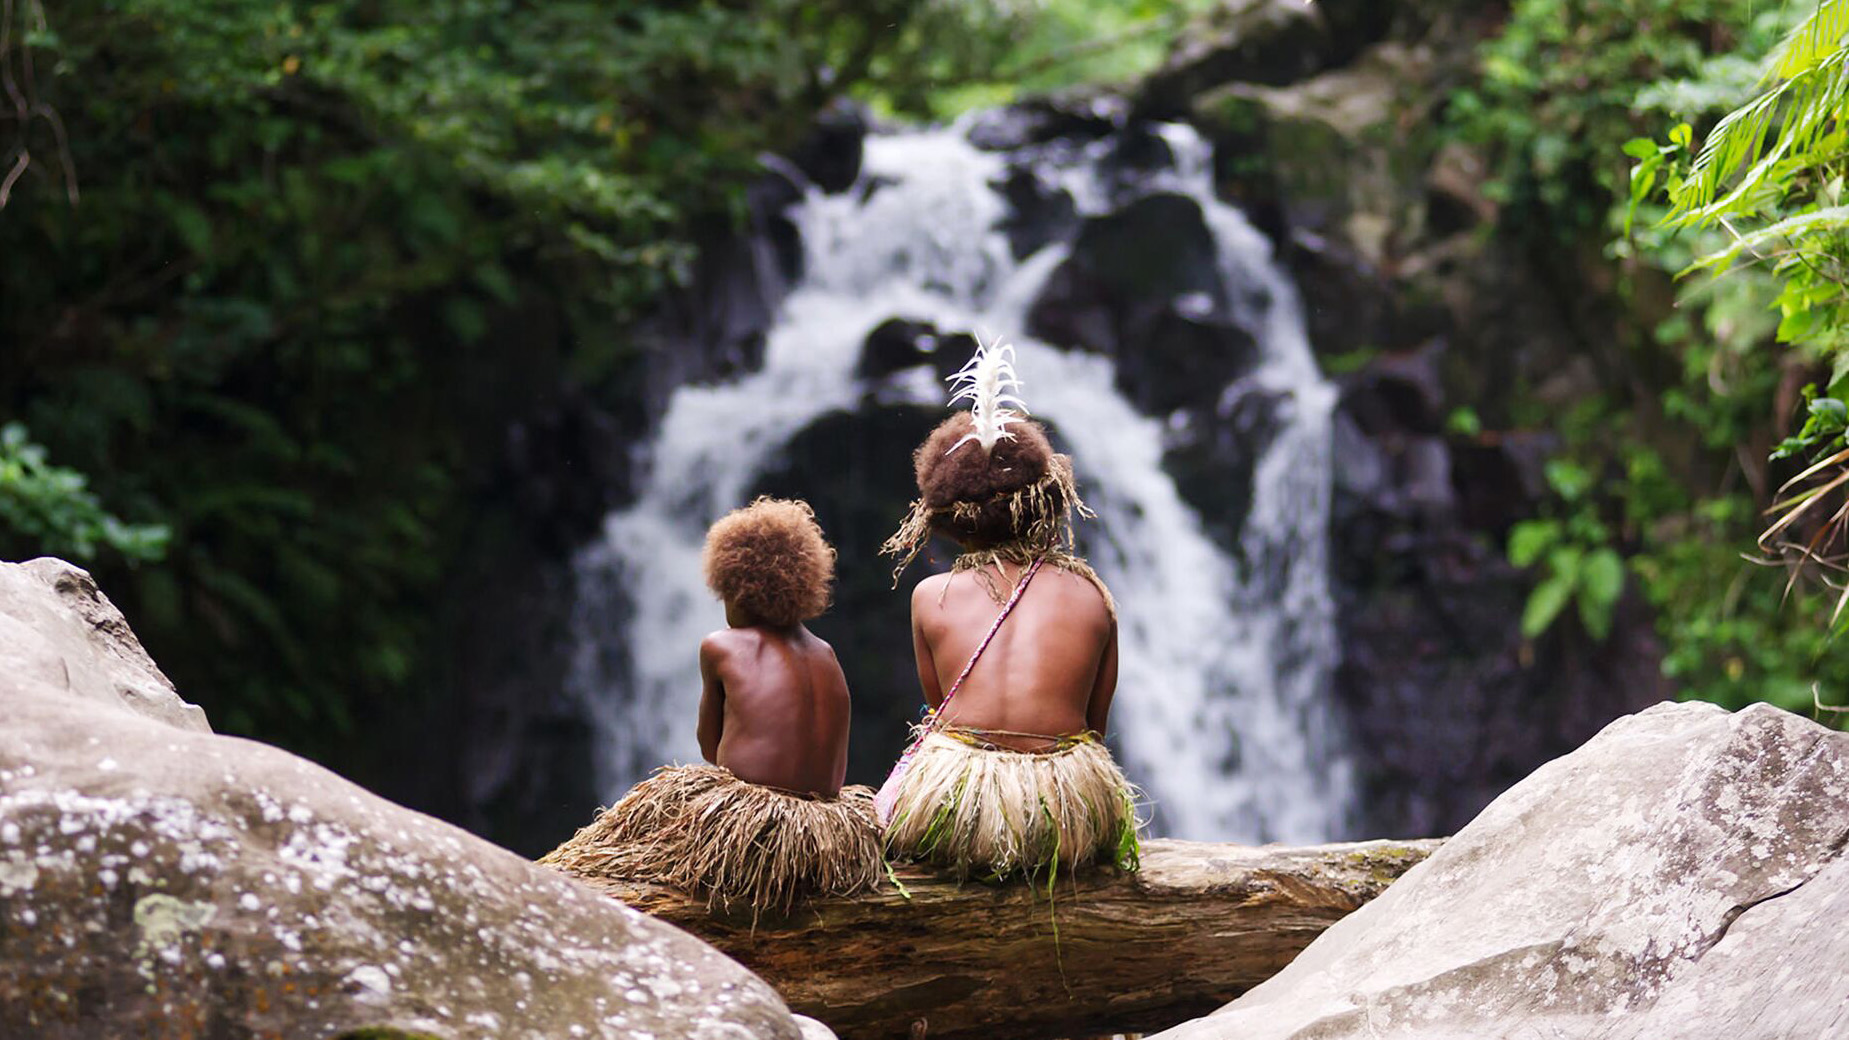 a scene from the movie Tanna